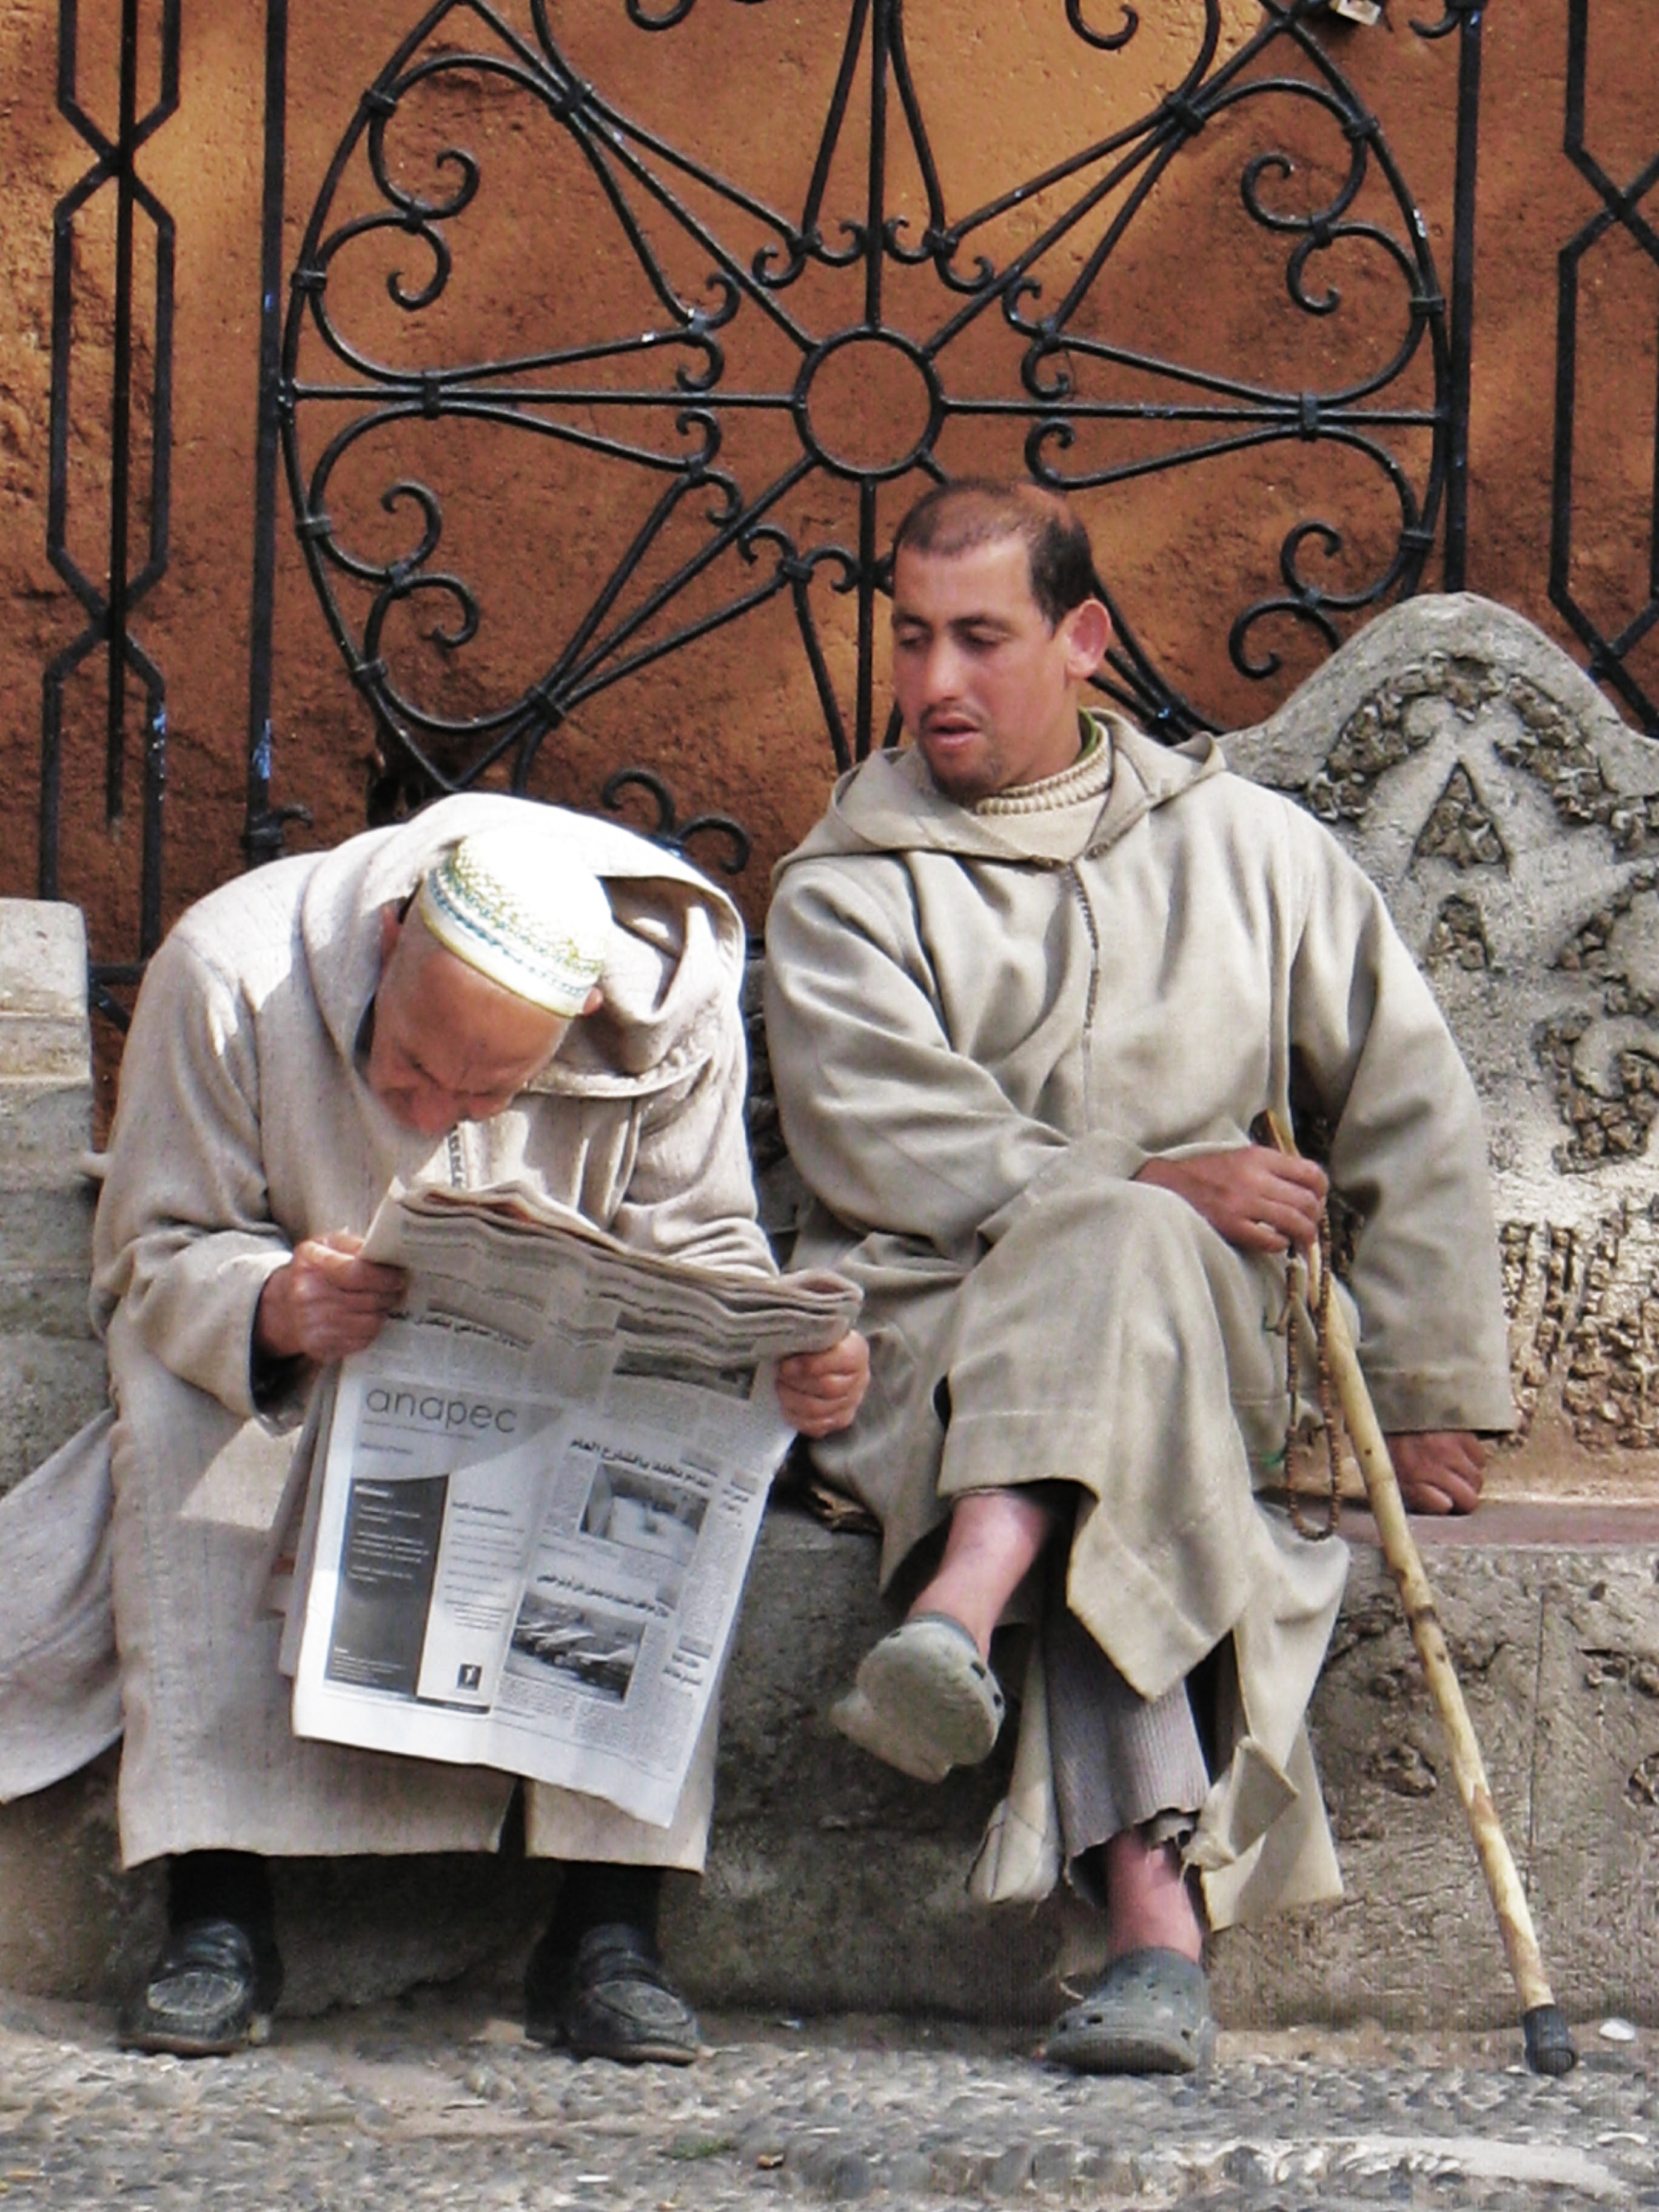 An old man looks closely at the newspaper while his friend tries to read it. 